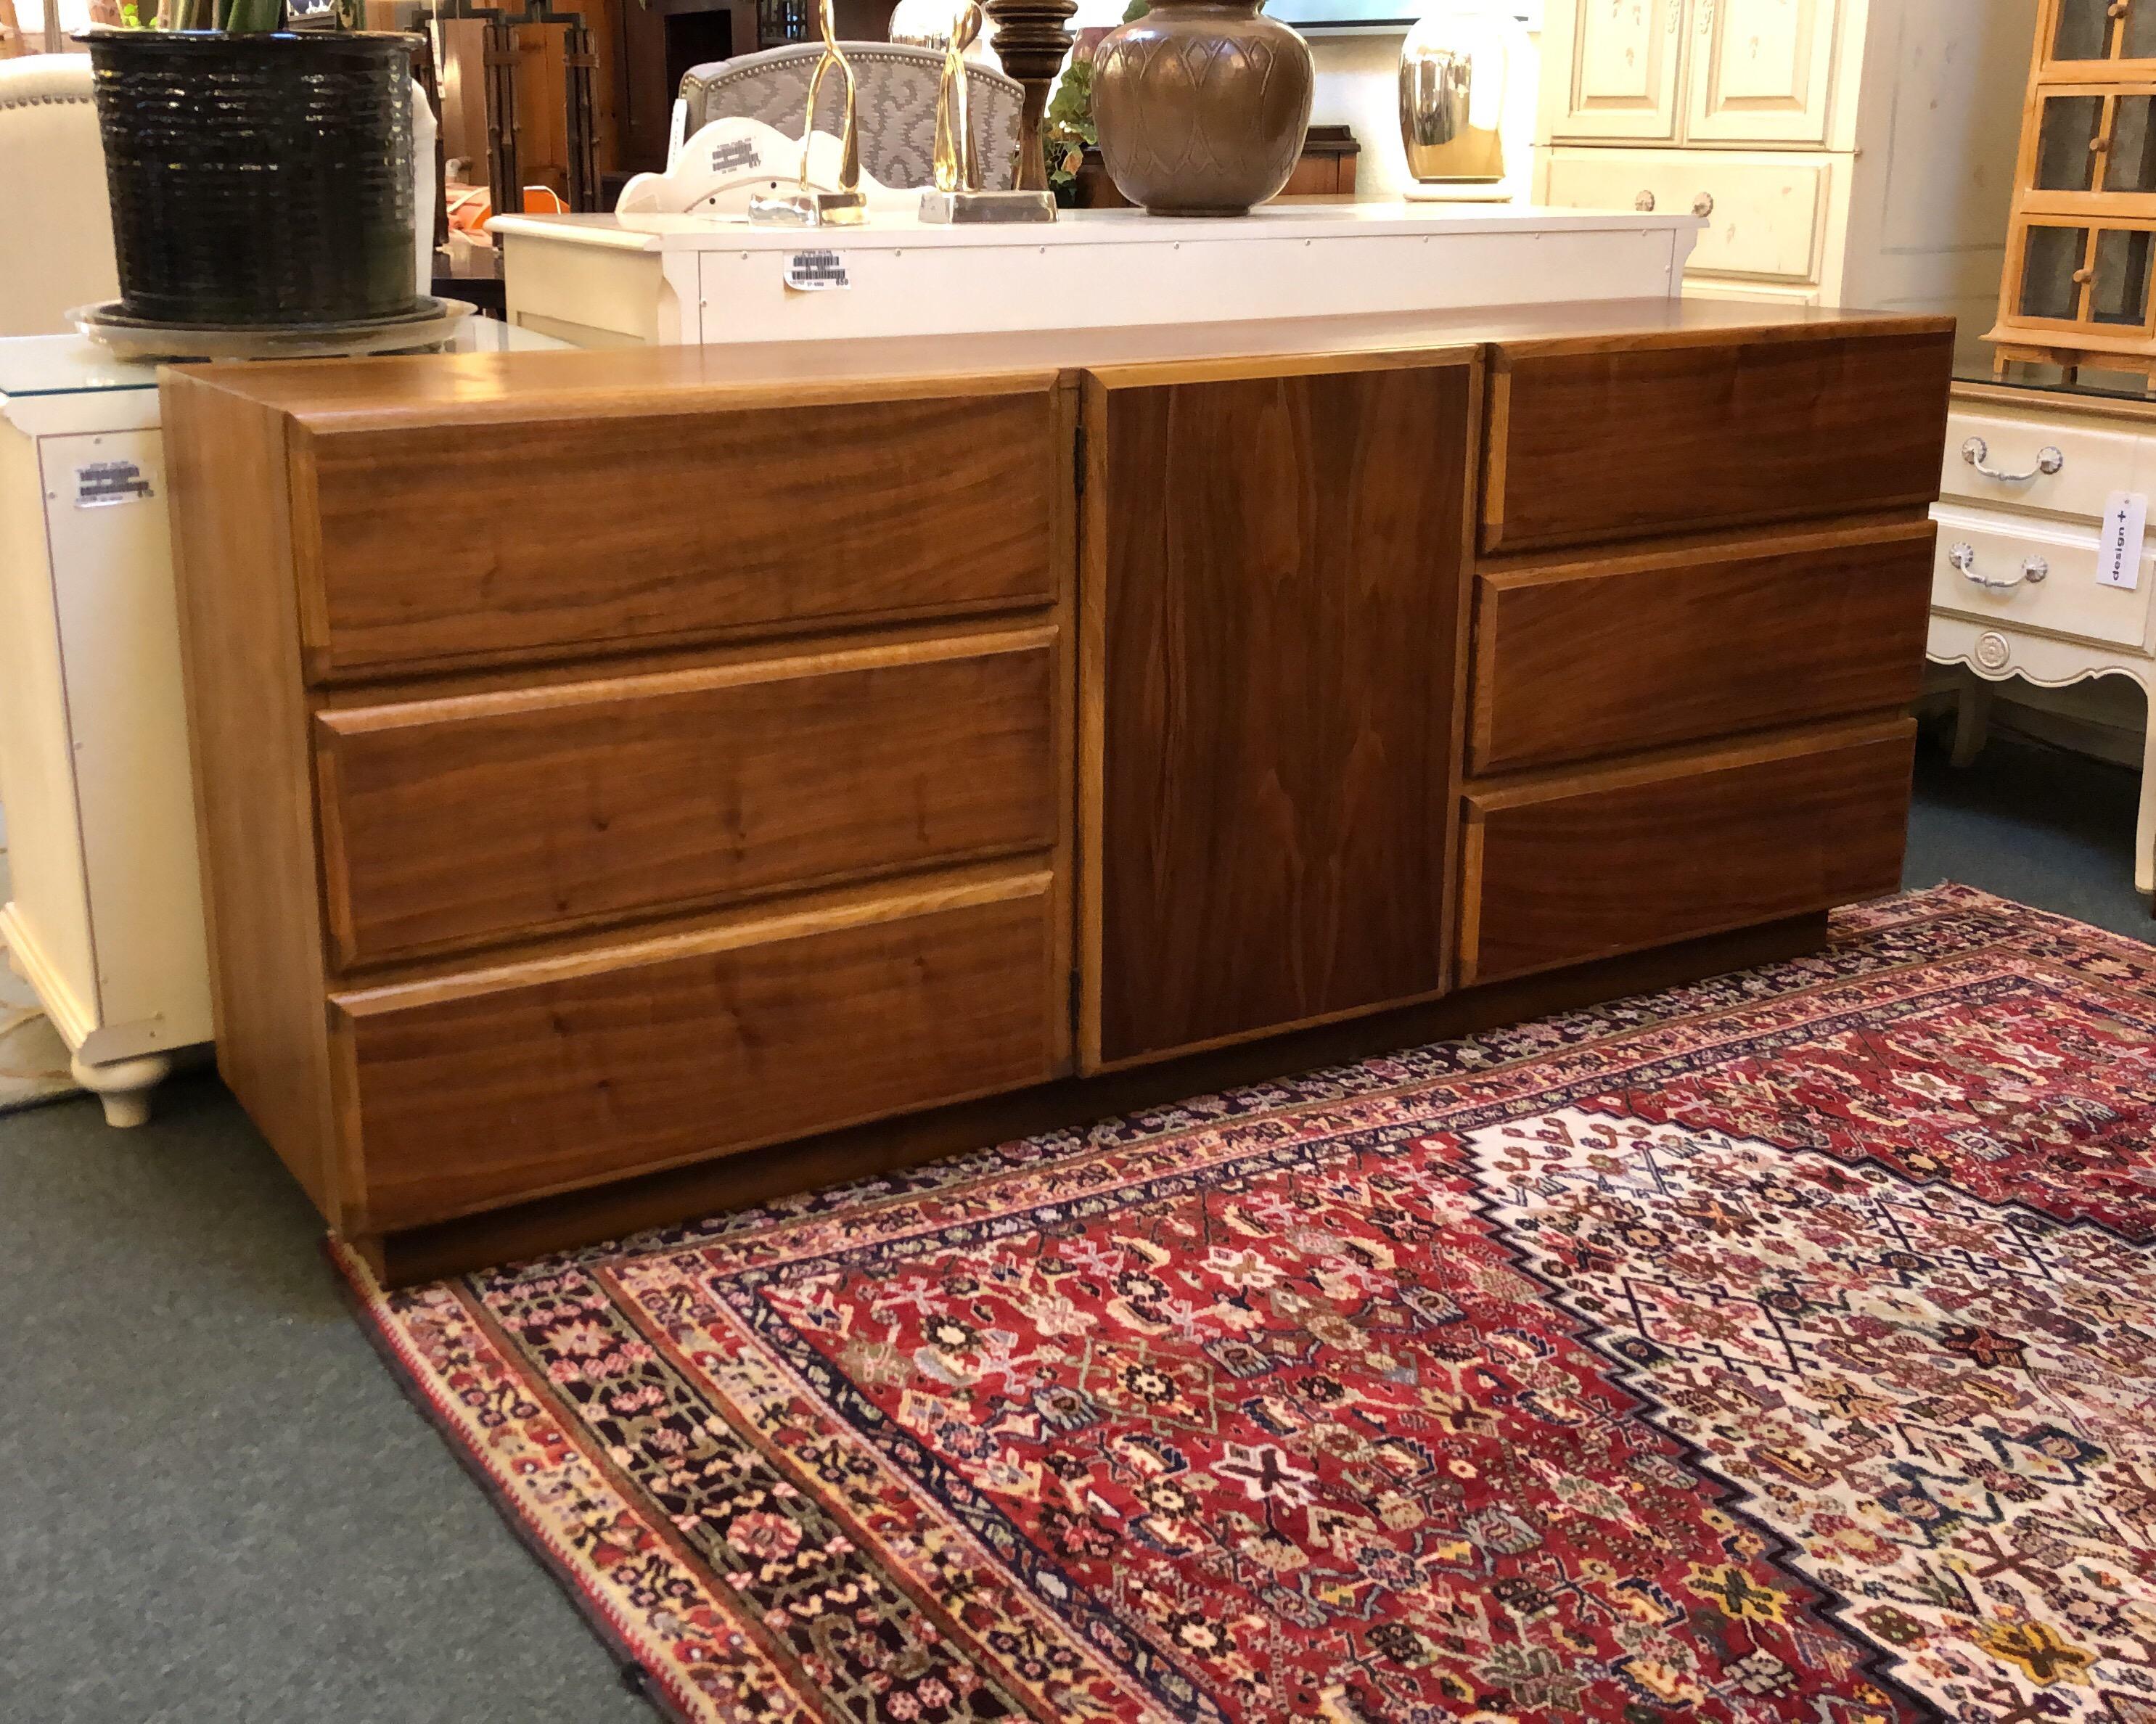 9-drawer from Lane Furniture. A midcentury beauty crafted in solid cherrywoods and veneers. The right hinge center door swings open to reveal three pullout drawers. Aged gracefully, an iconic design that fits in our modern day. Made in USA.